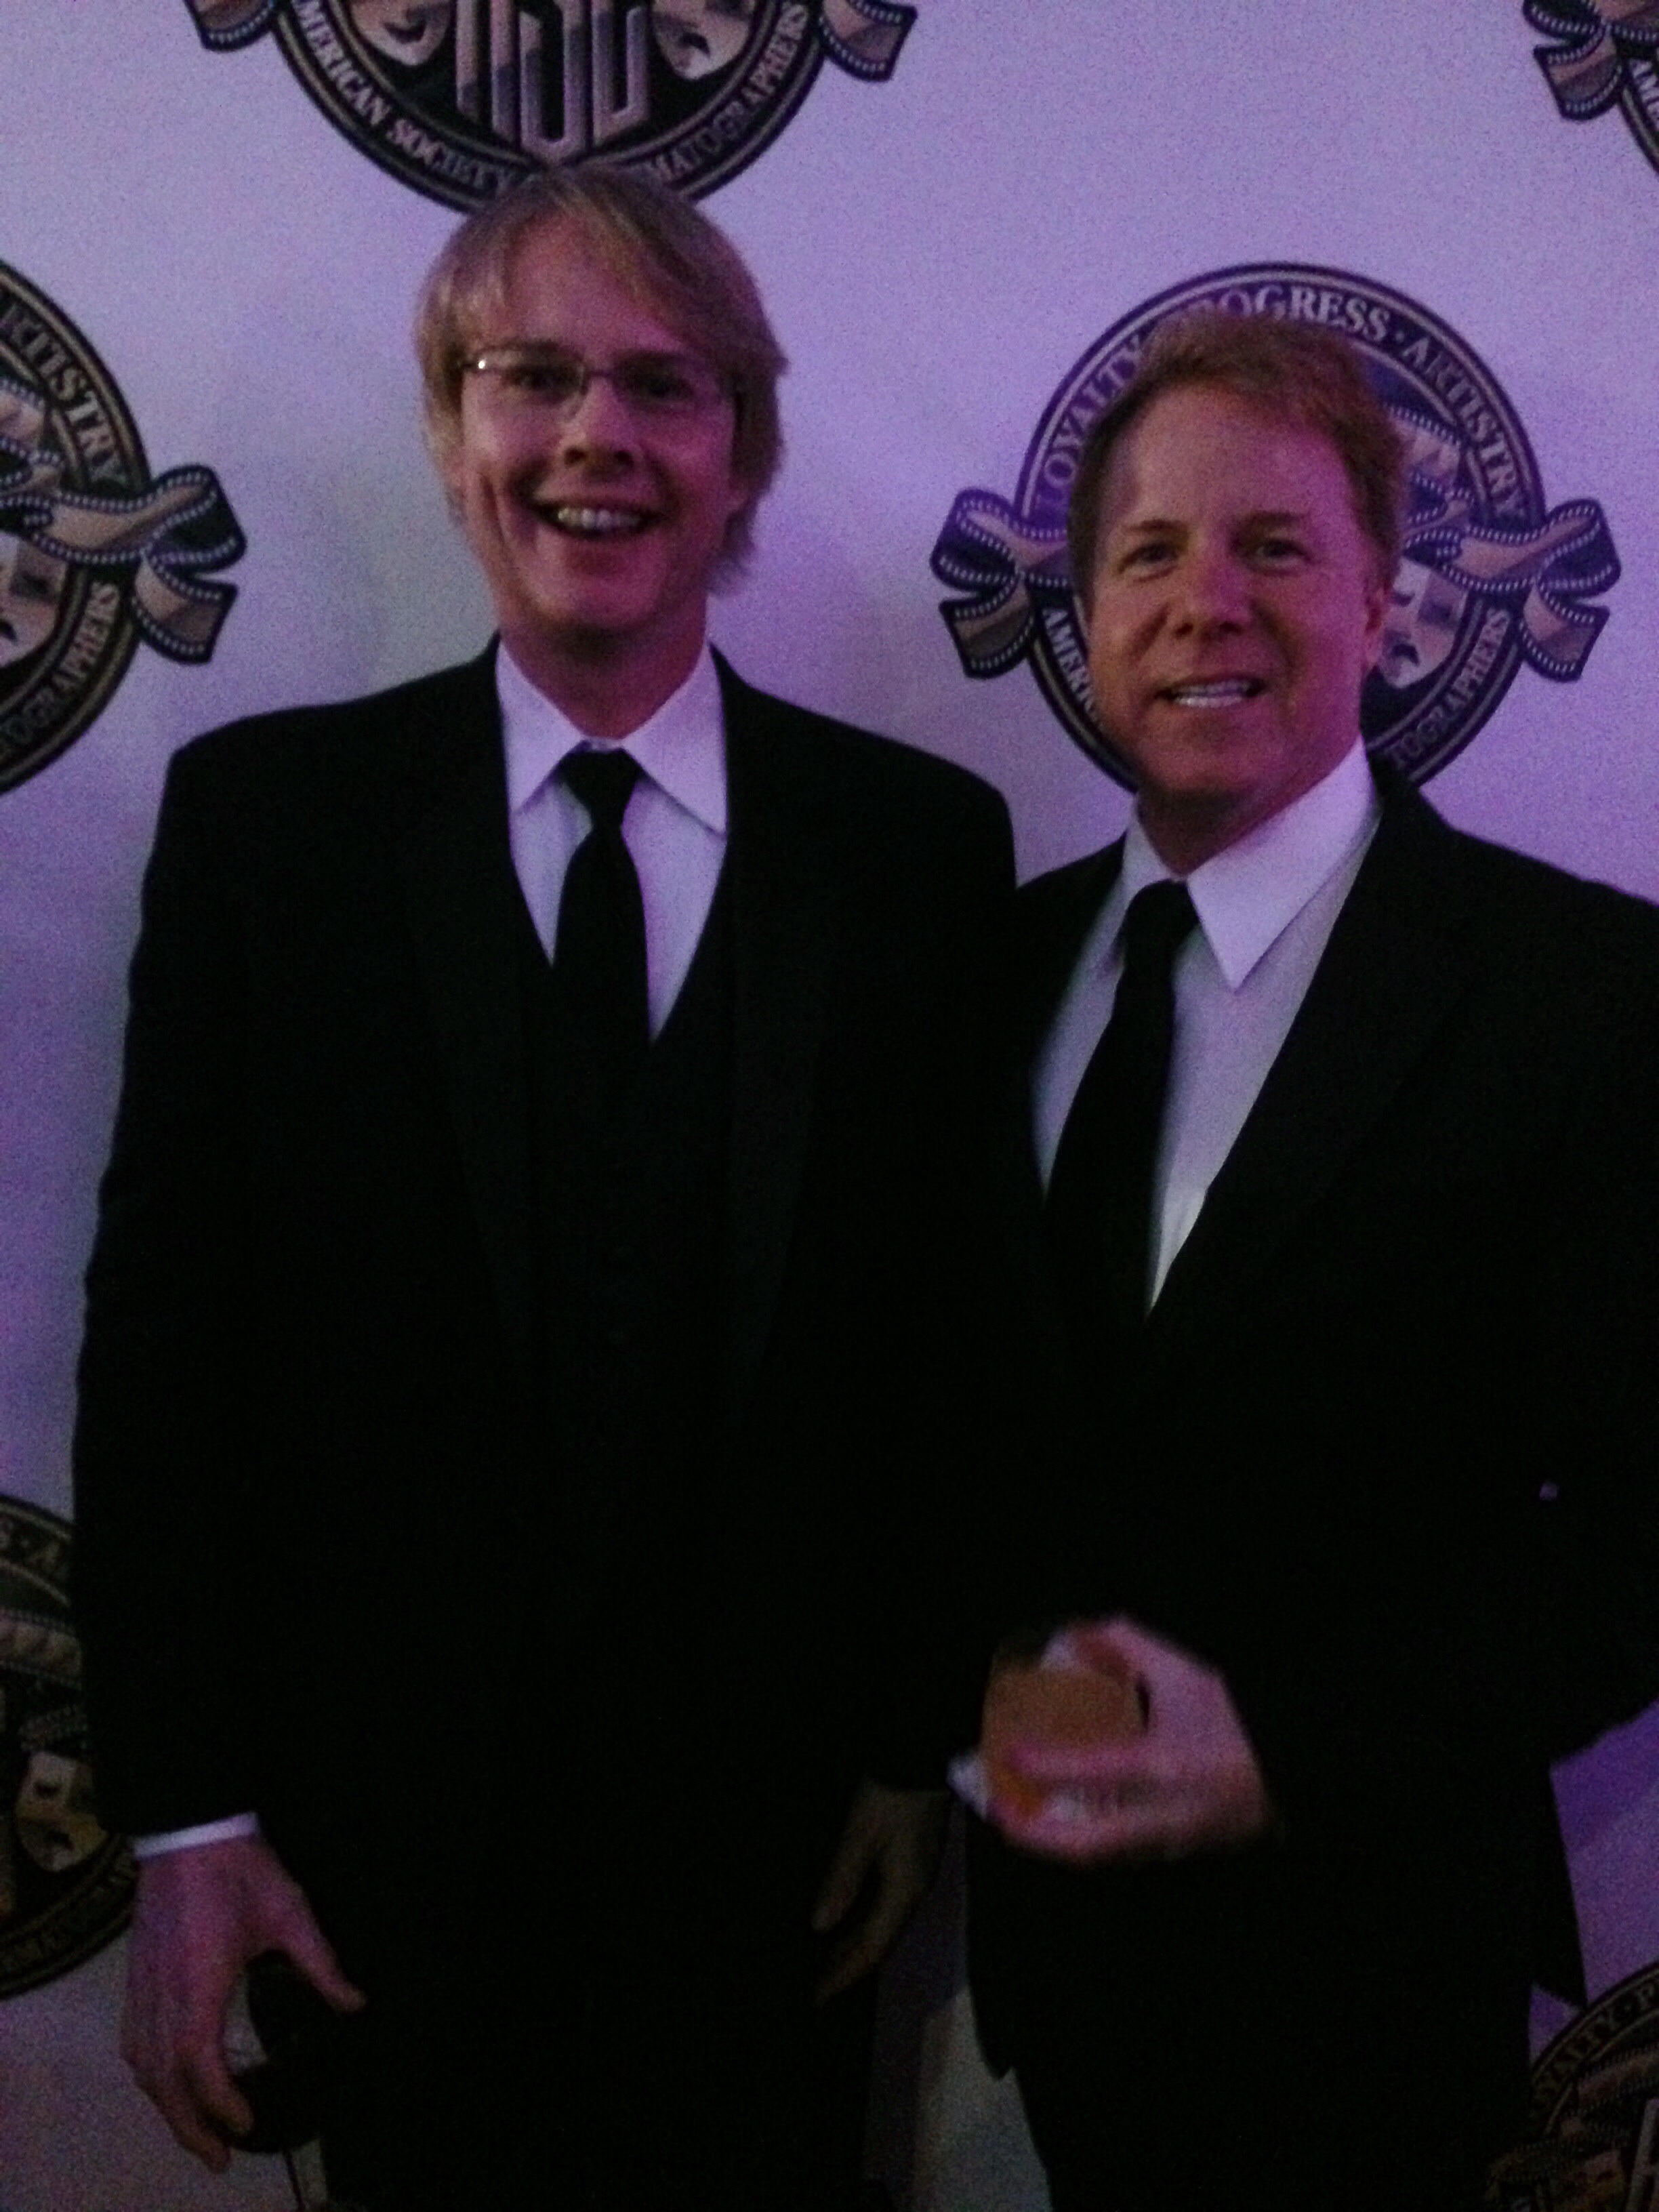 Brian Gaffney and Dan Lion of Technicolor Hollywood at 2014 ASC Awards